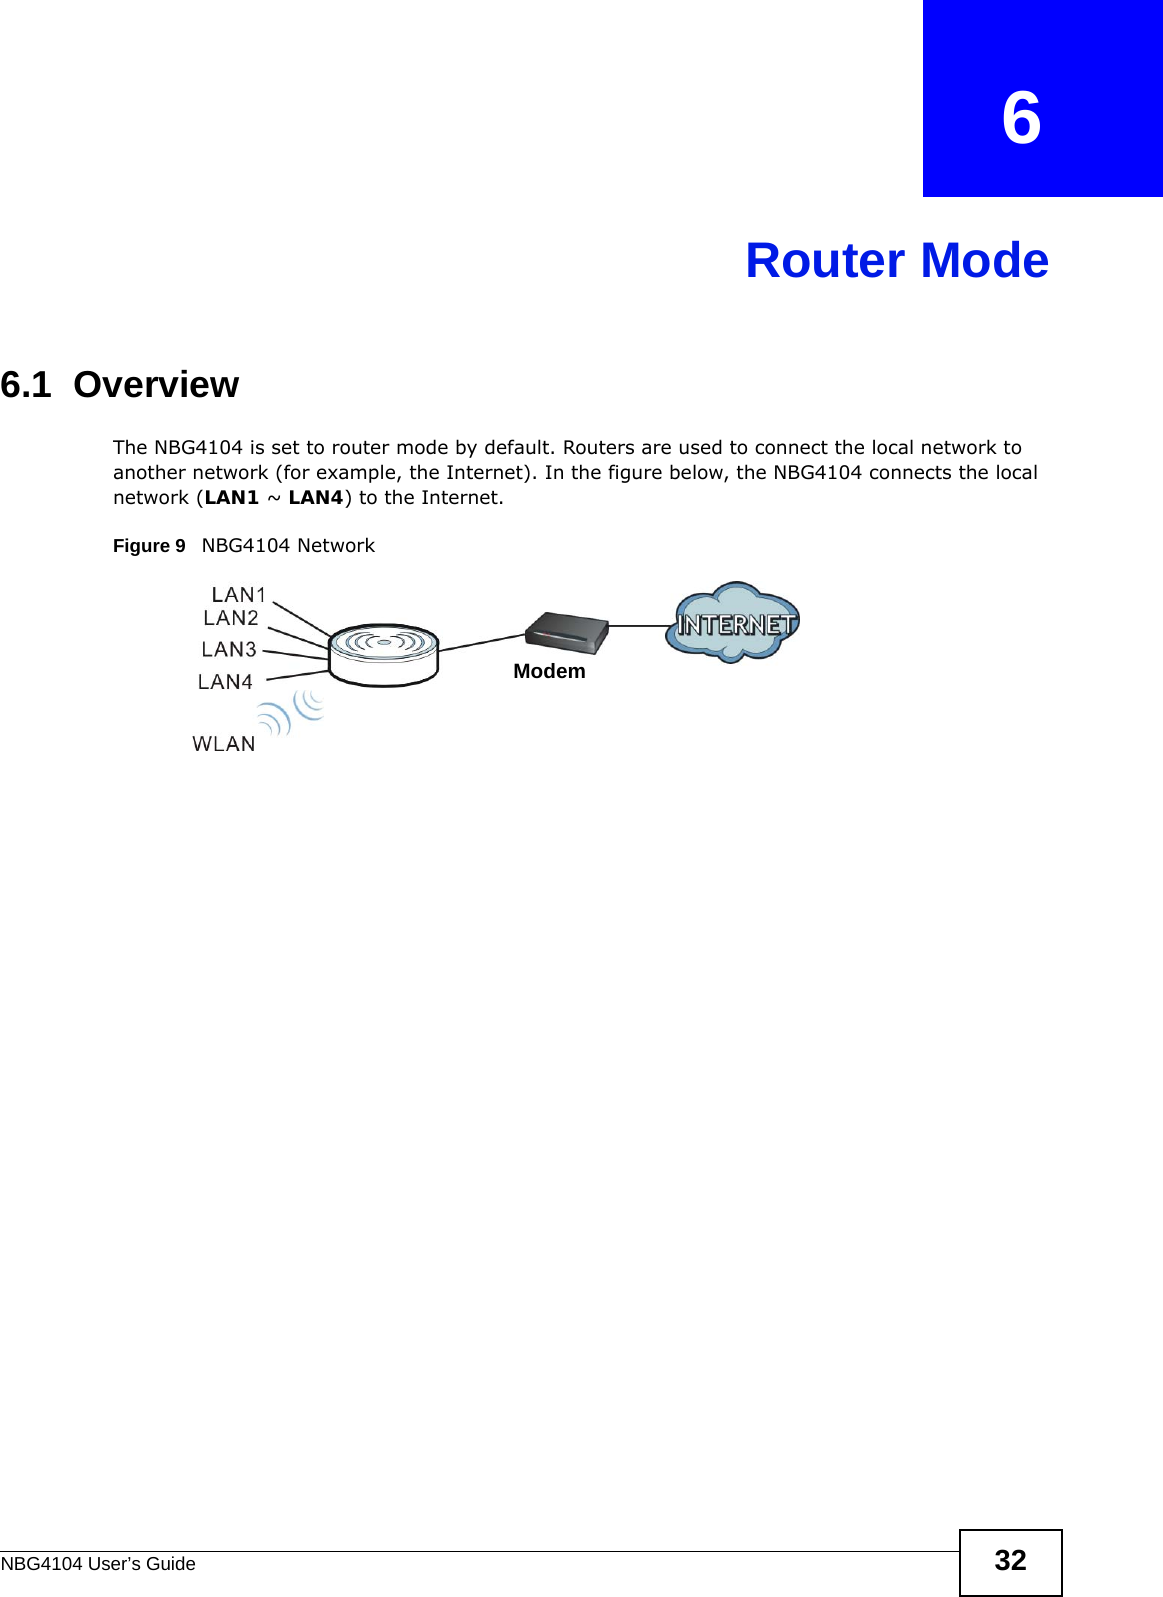 NBG4104 User’s Guide 32CHAPTER   6Router Mode6.1  OverviewThe NBG4104 is set to router mode by default. Routers are used to connect the local network to another network (for example, the Internet). In the figure below, the NBG4104 connects the local network (LAN1 ~ LAN4) to the Internet.Figure 9   NBG4104 NetworkModem